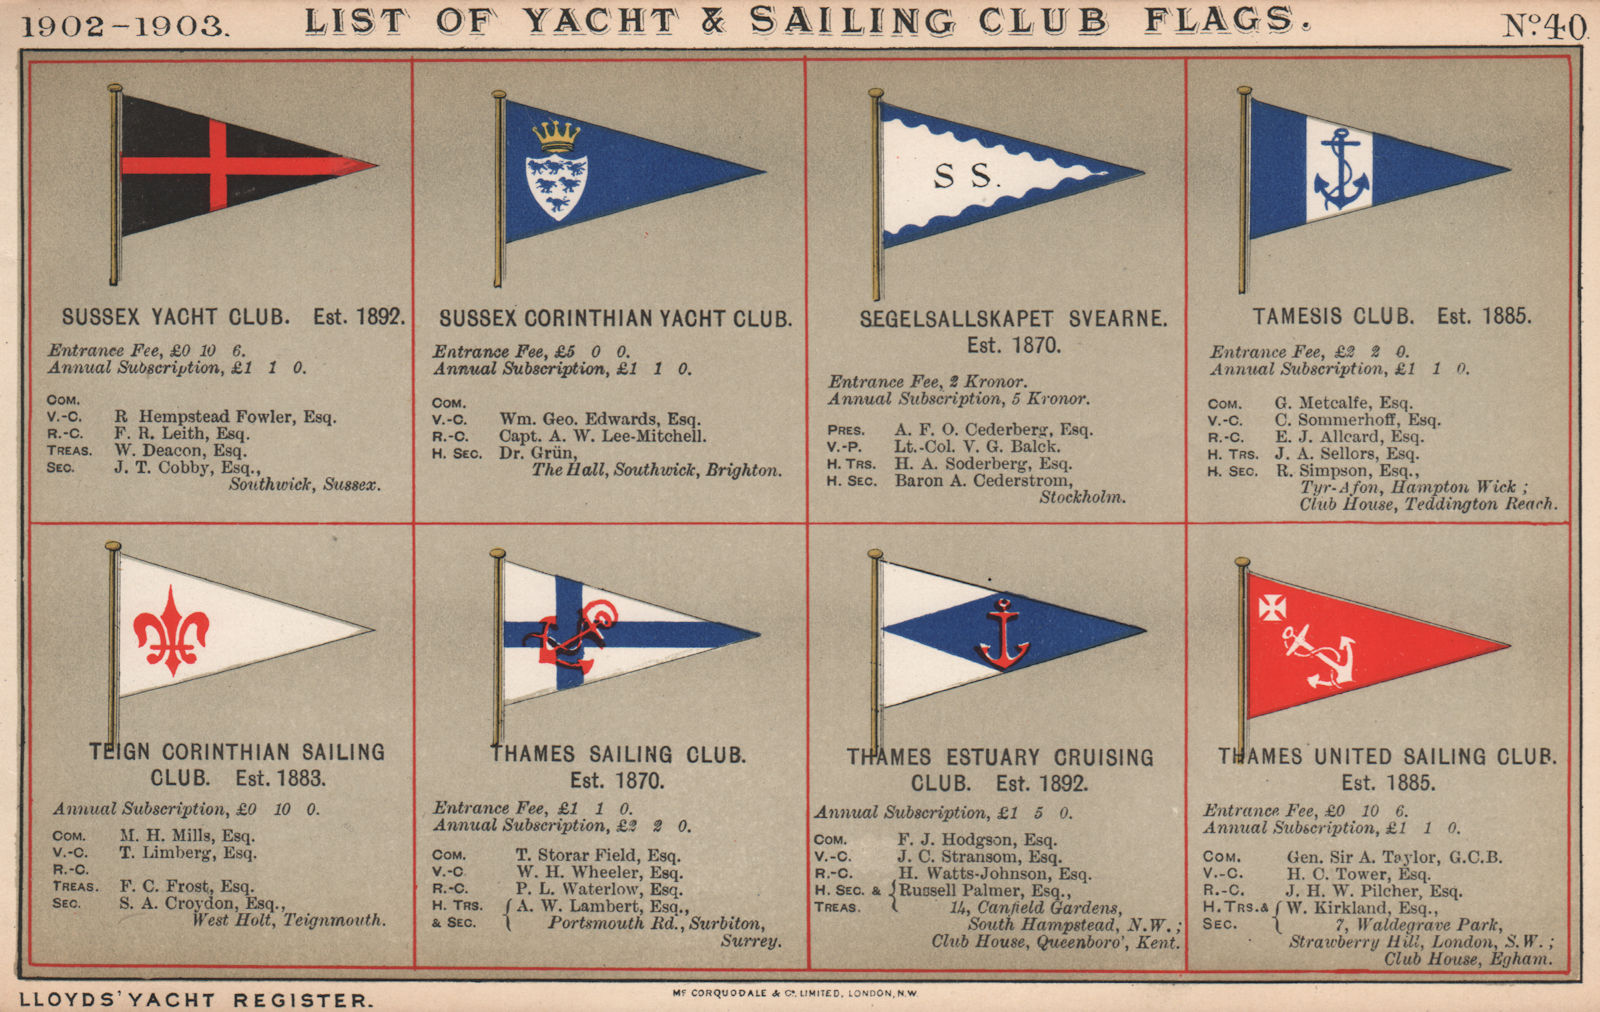 YACHT & SAILING CLUB FLAGS S-T. Sussex - Tamesis - Teign - Thames United 1902